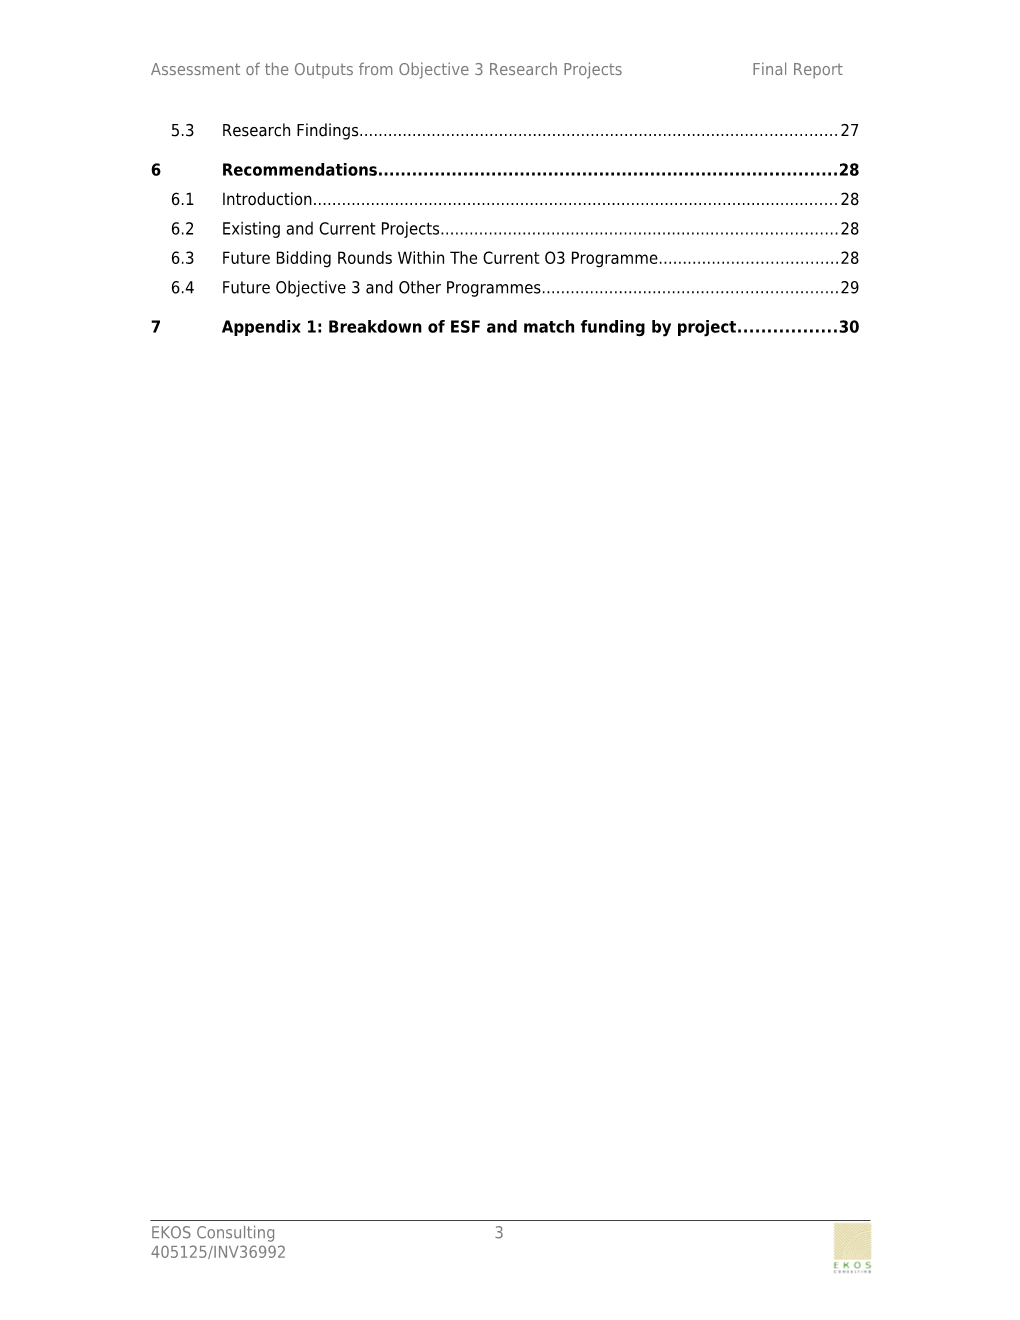 Assessment of the Outputs from Objective 3 Research Projectsfinal Report